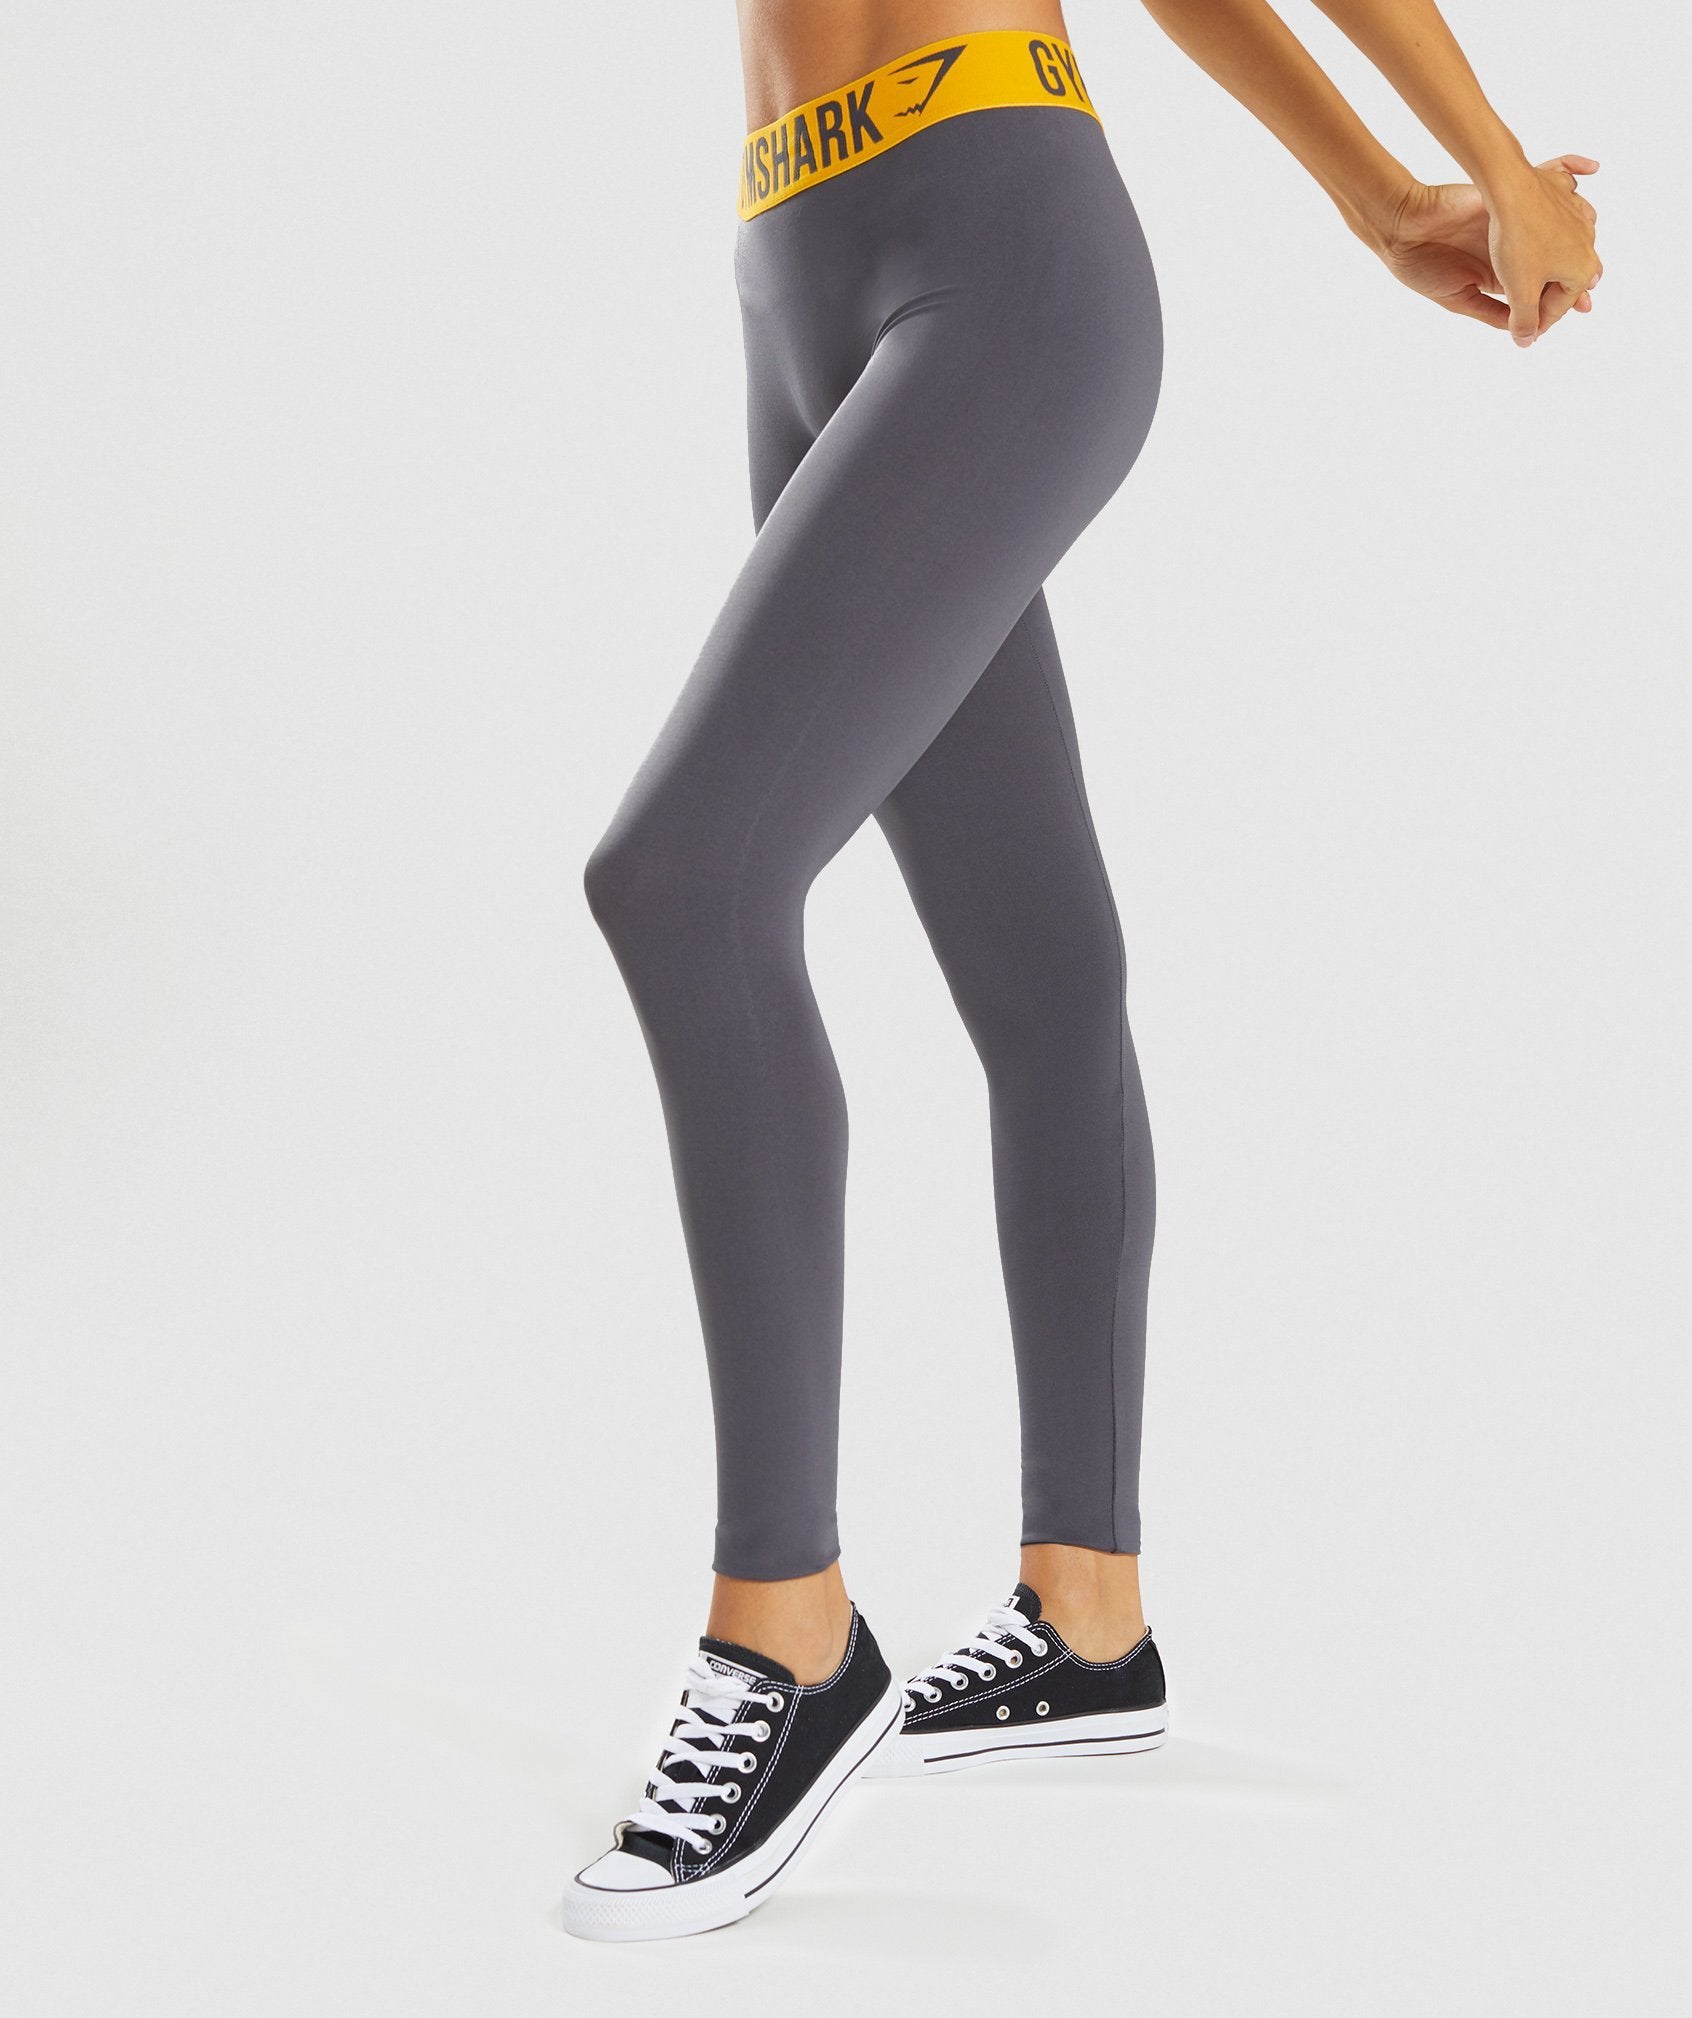 Fit Seamless Leggings in Charcoal/Citrus Yellow - view 3